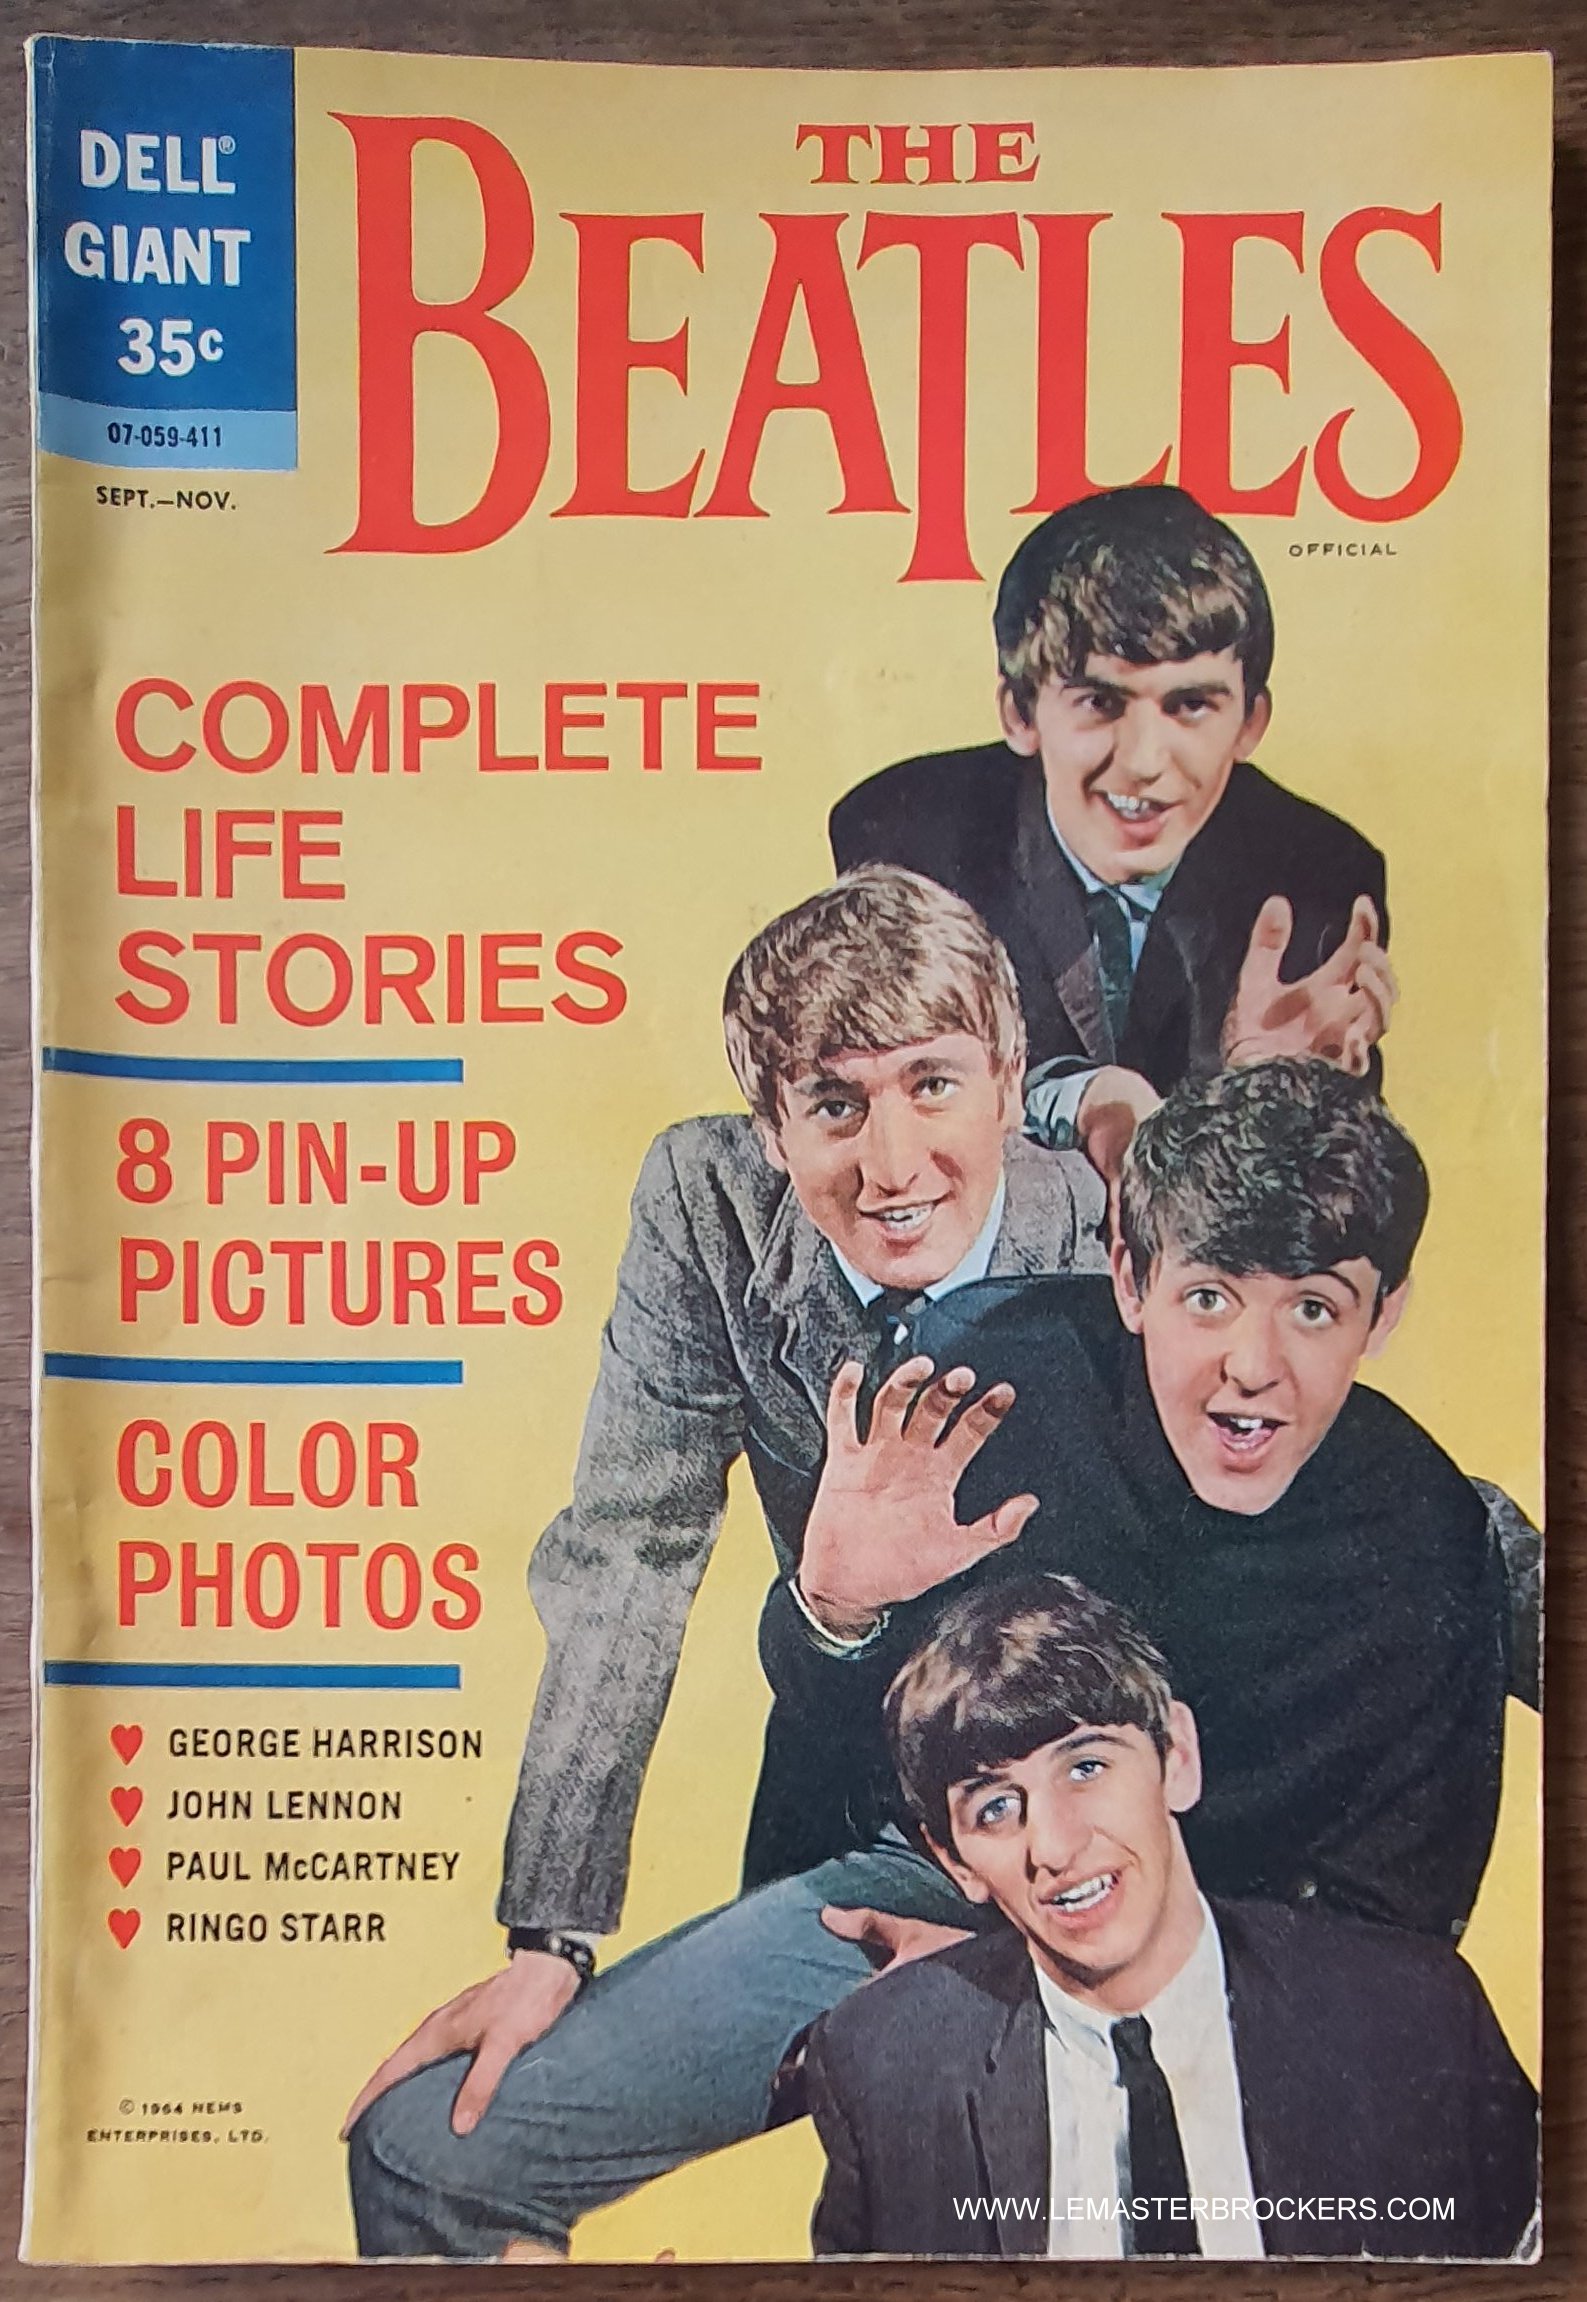 THE-BEATLES-1964-DELL-GIANT-VINTAGE-LEMASTERBROCKERS